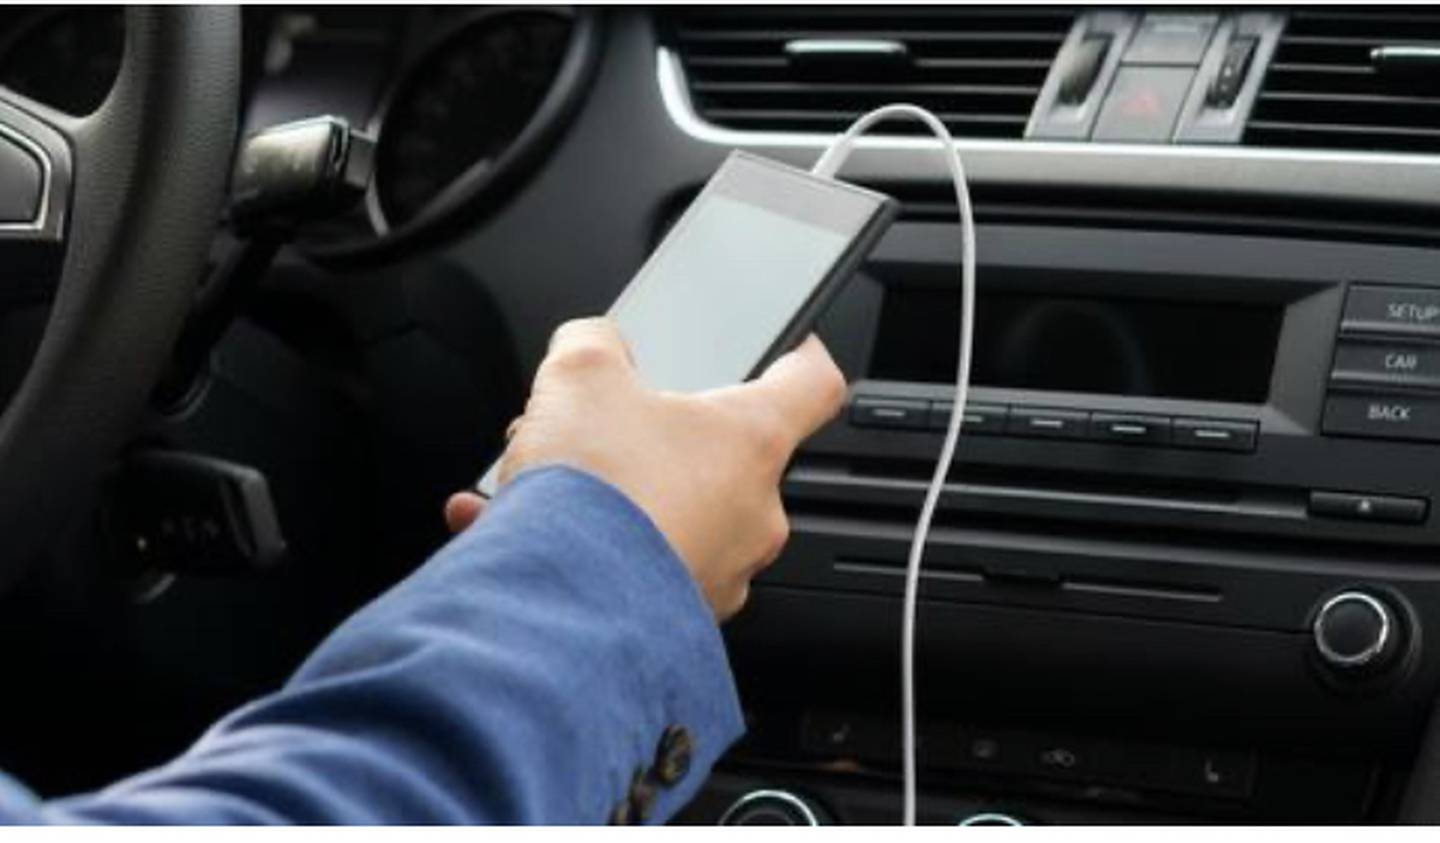 Why not charge the cell phone in the car?